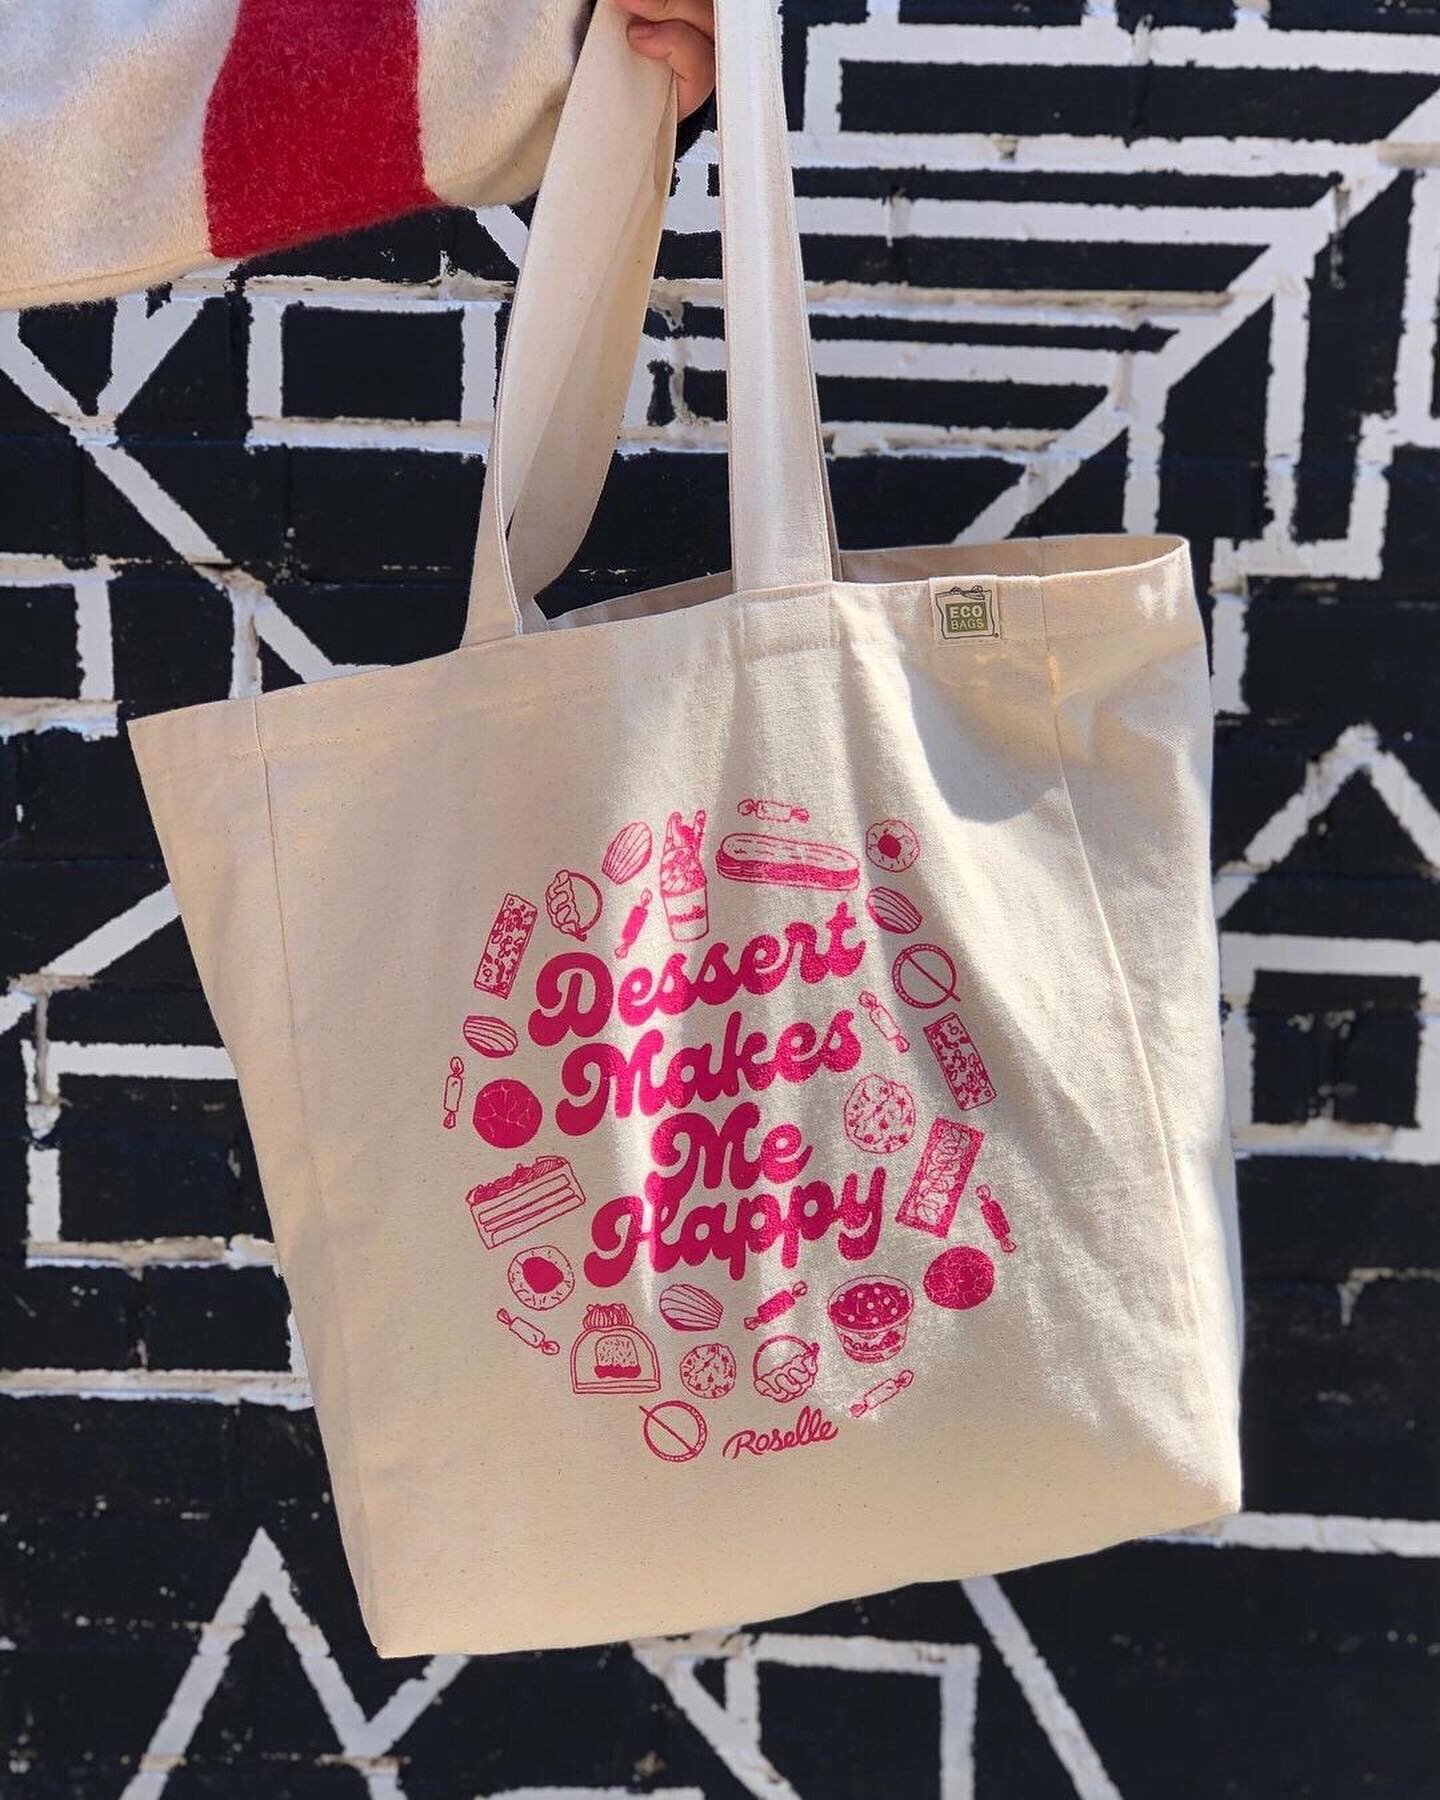 Attn: Dessert lovers! 🍪🍰🧁 I created something sweet for Toronto dessert shop @roselle_to and it&rsquo;s finally available to purchase! Introducing the Roselle Tote Bag v3.0, a 10oz. 100% recycled cotton tote with an inner pocket to comfortably fit